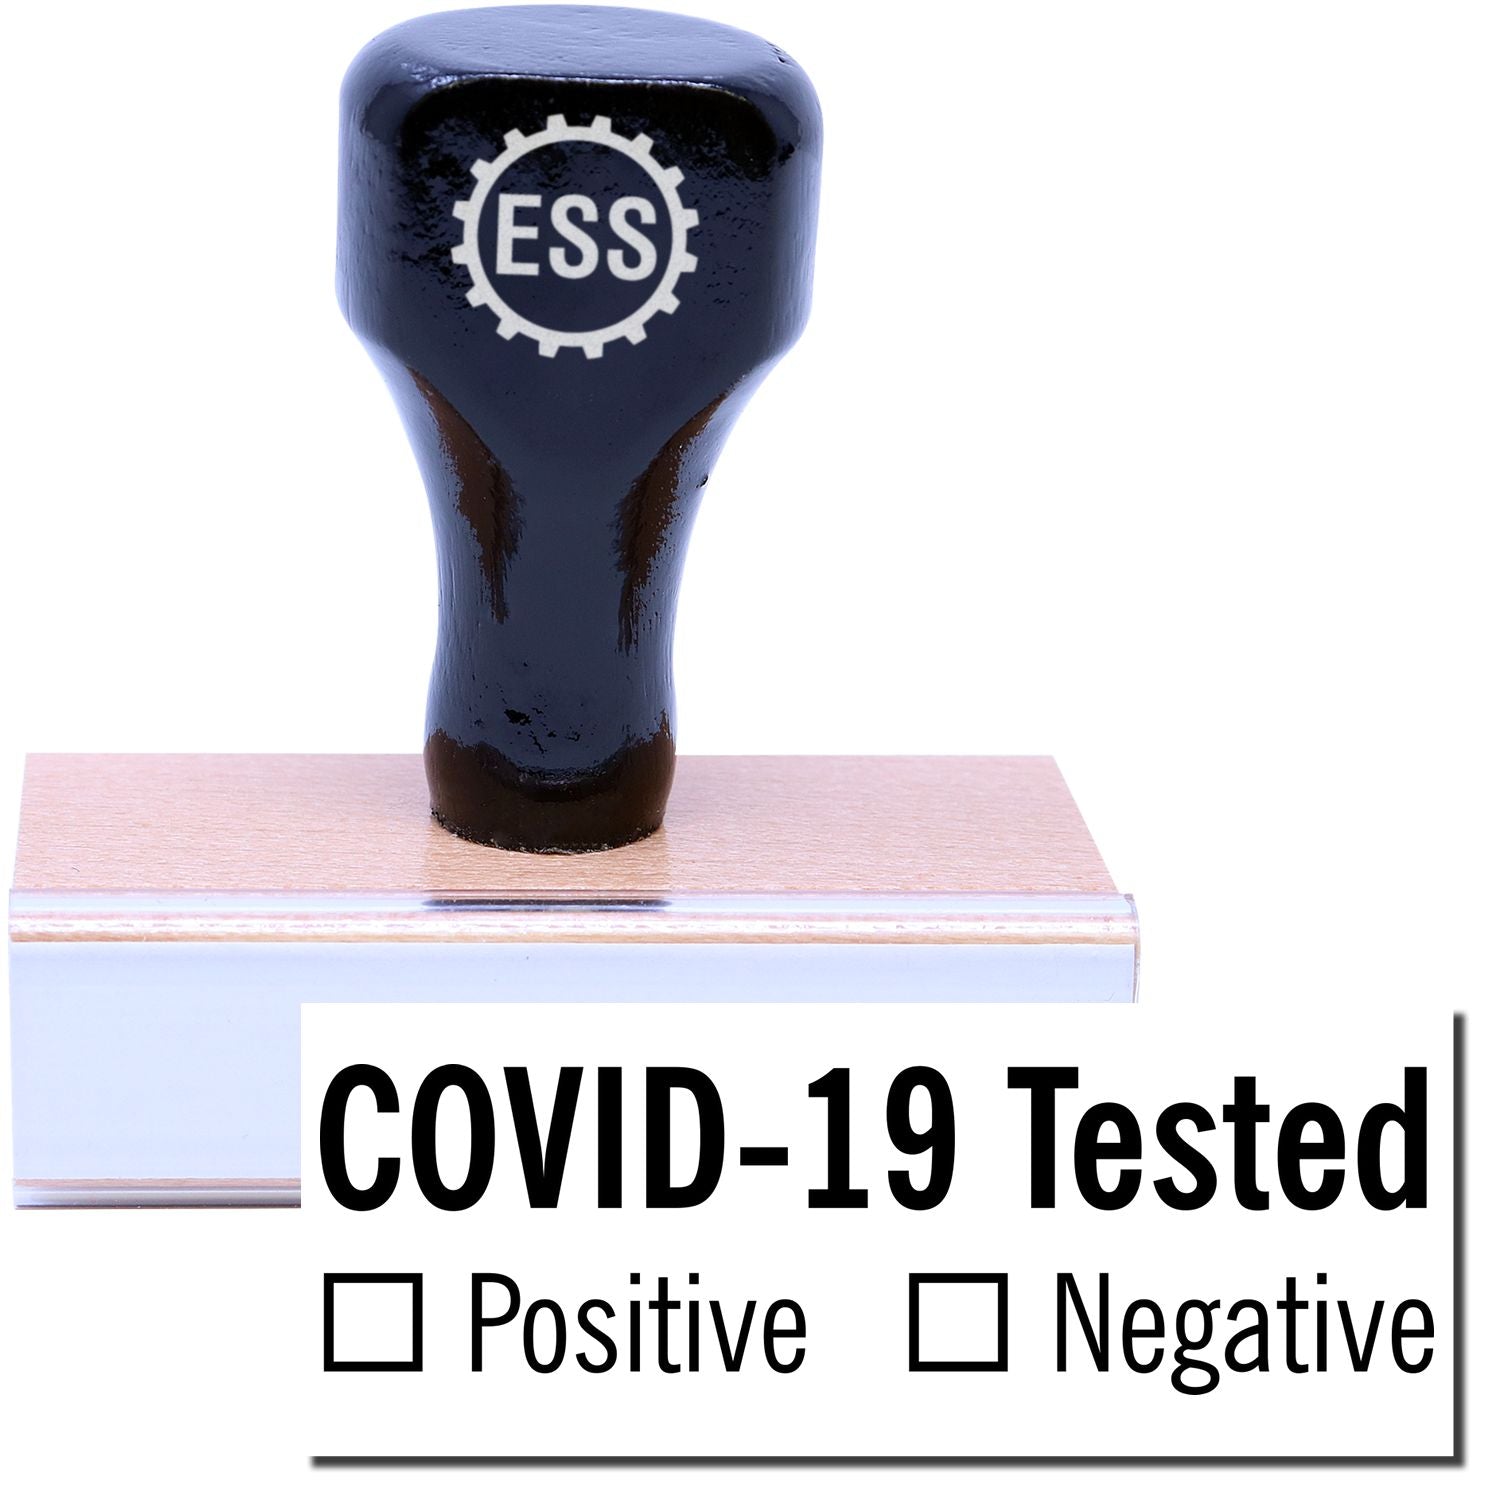 A stock office rubber stamp with a stamped image showing how the text "COVID-19 Tested" in a large font with a space underneath where a box can be checked based on whether a person is positive or negative for the virus is displayed after stamping.